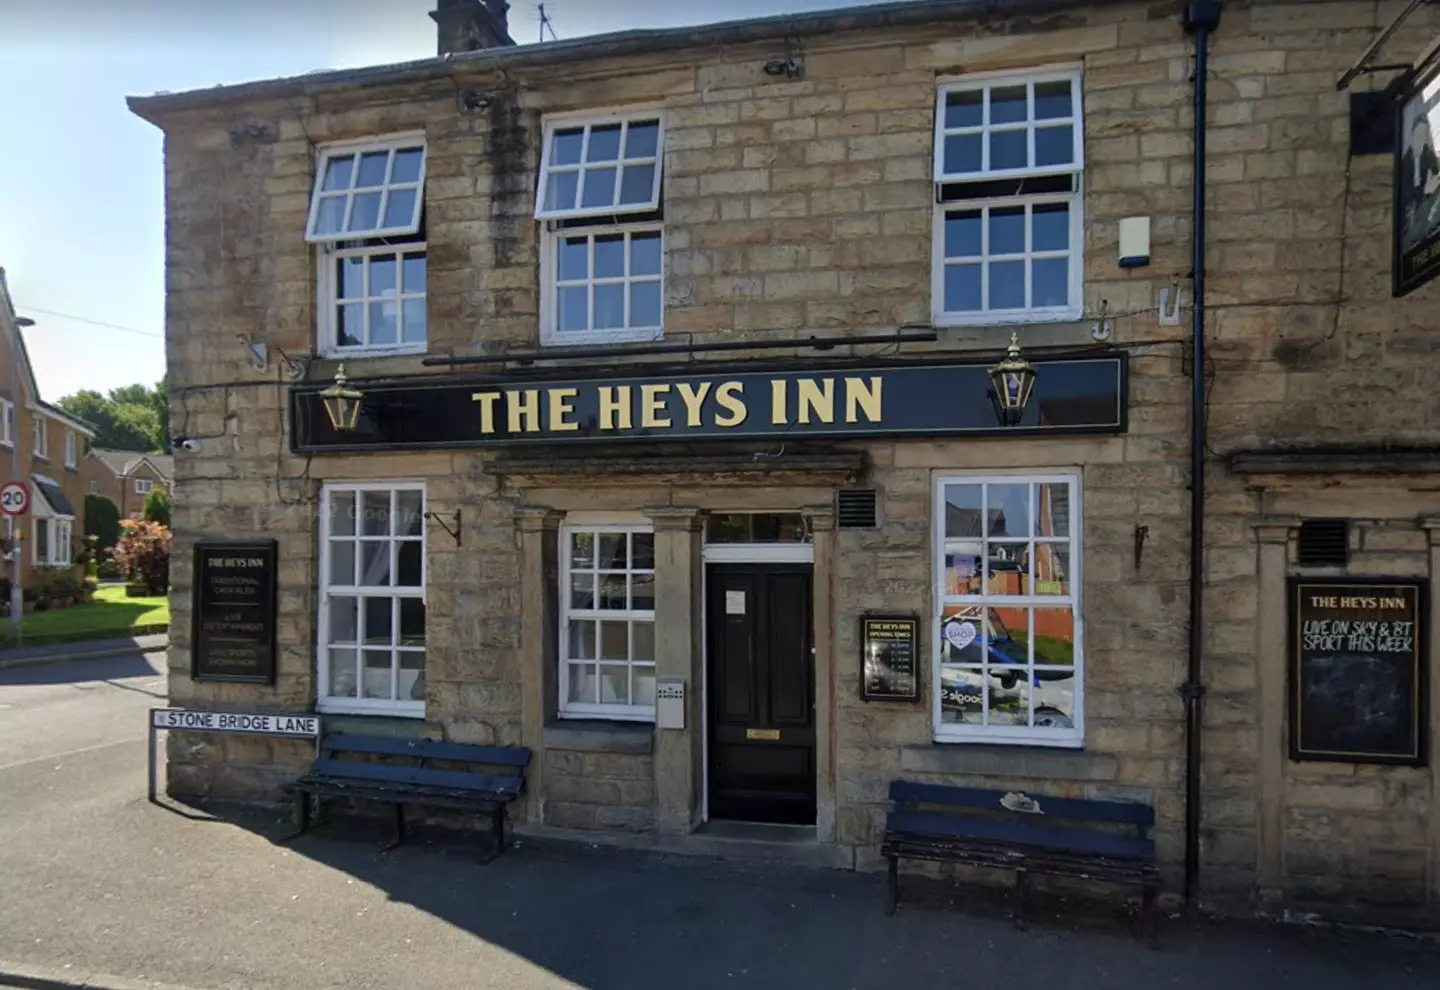 Punters at Heys Inn have loved the sign.